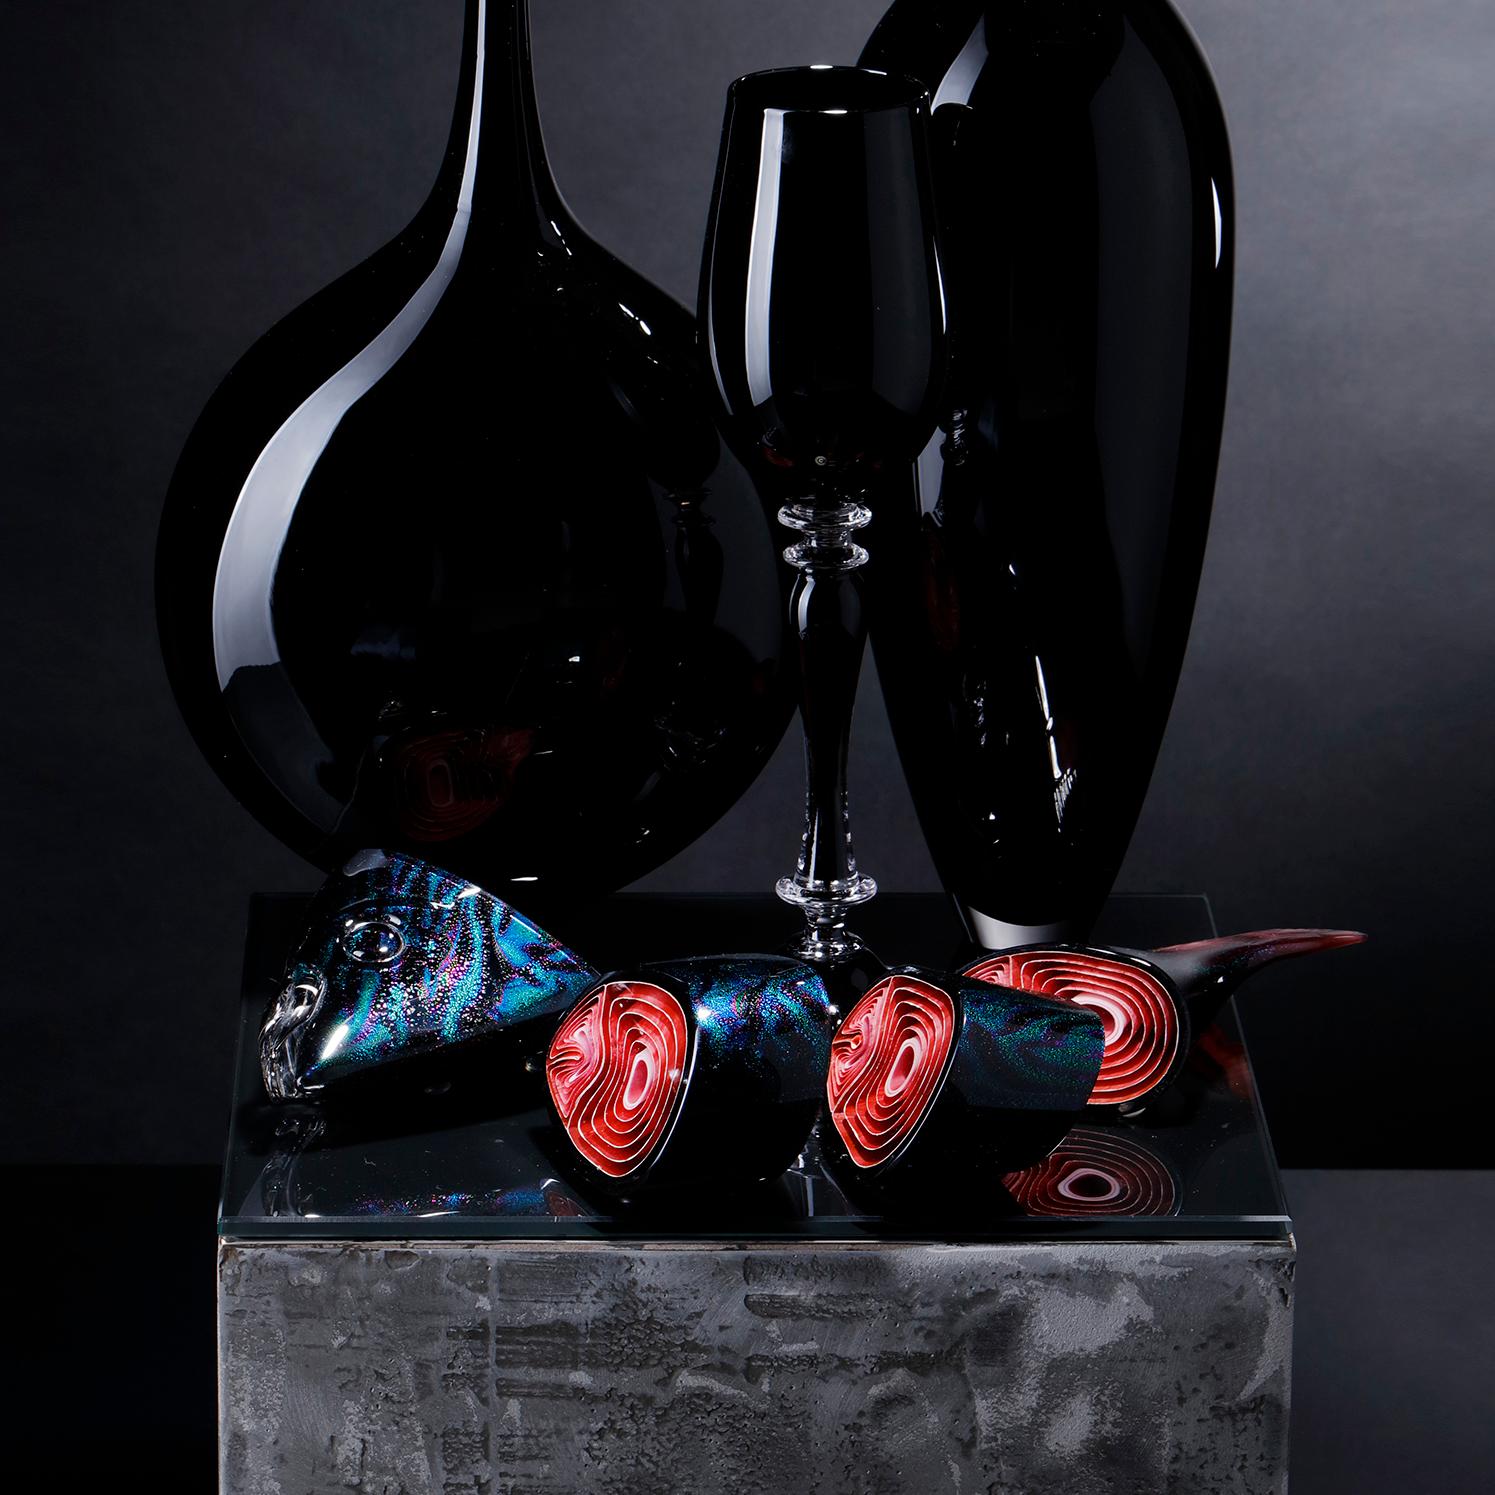 Still Life with Fish, a Black and Red Glass Still Life Art Work by Elliot Walker 2